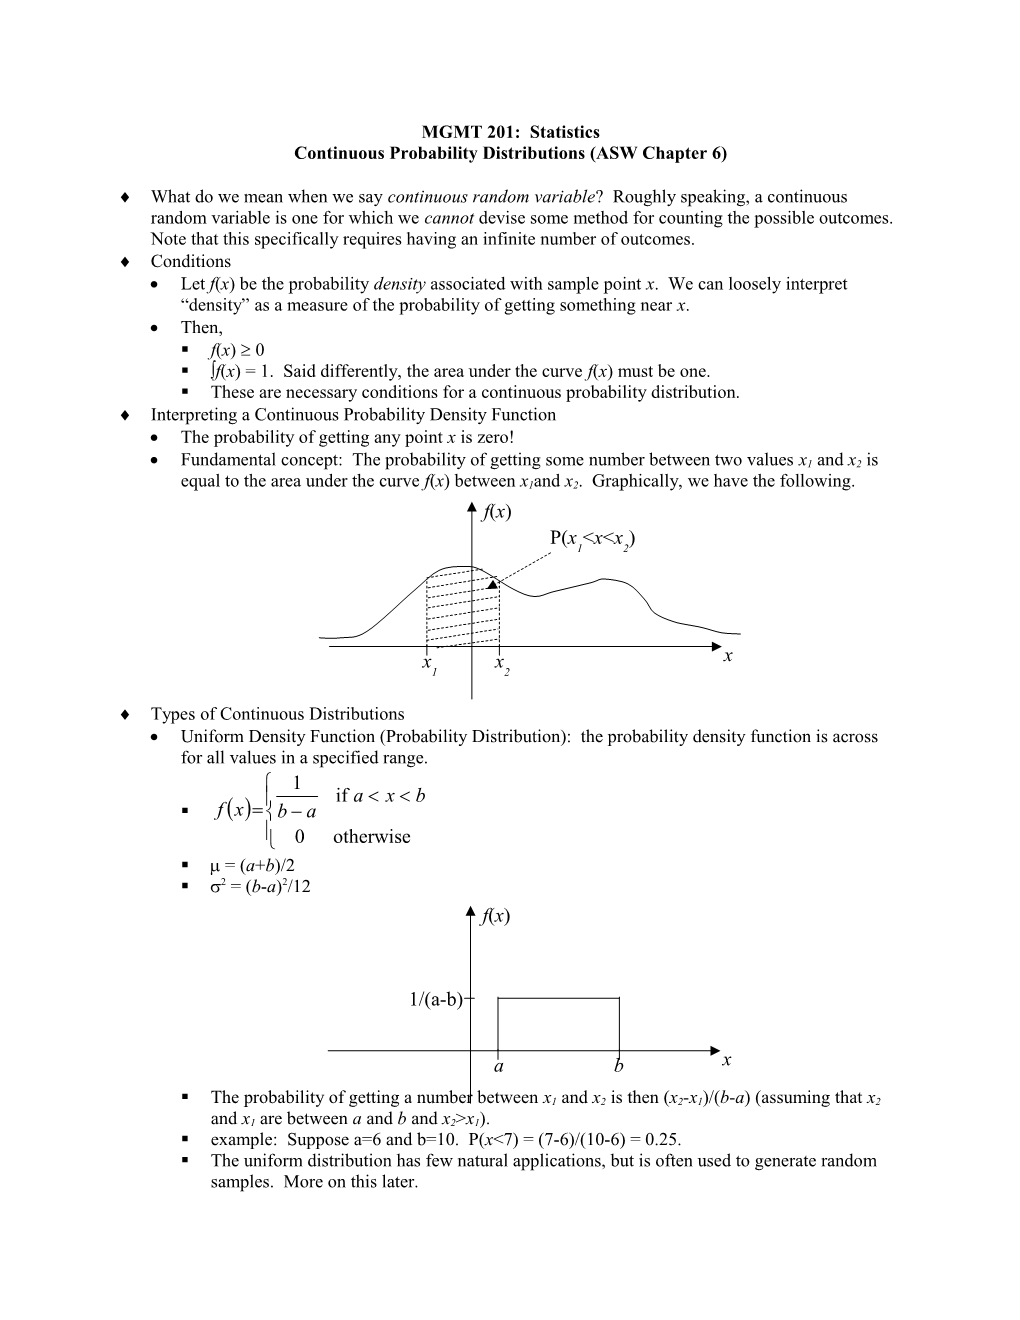 Continuous Probability Distributions (ASW Chapter 6)